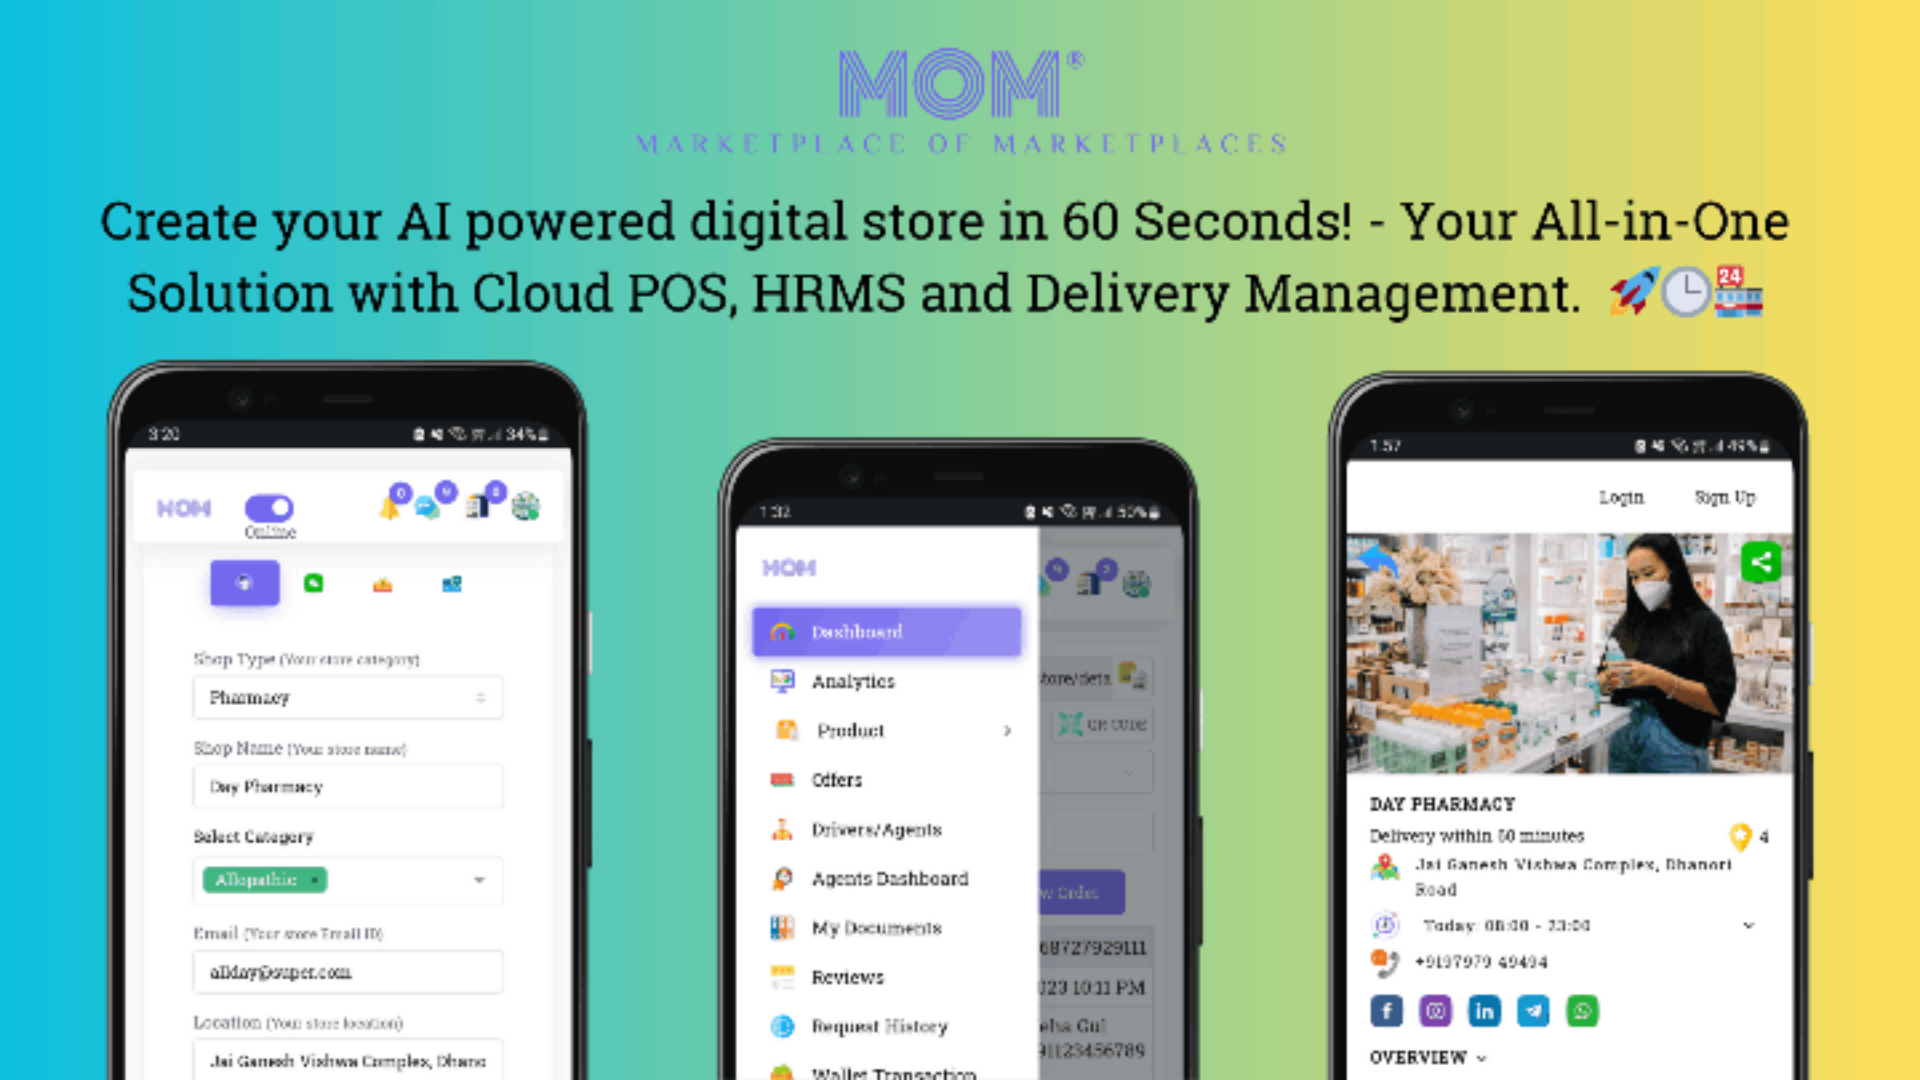 Lifetime Deal to MOM Shop App-AI powered store creator: PRO ACTIVE for $199